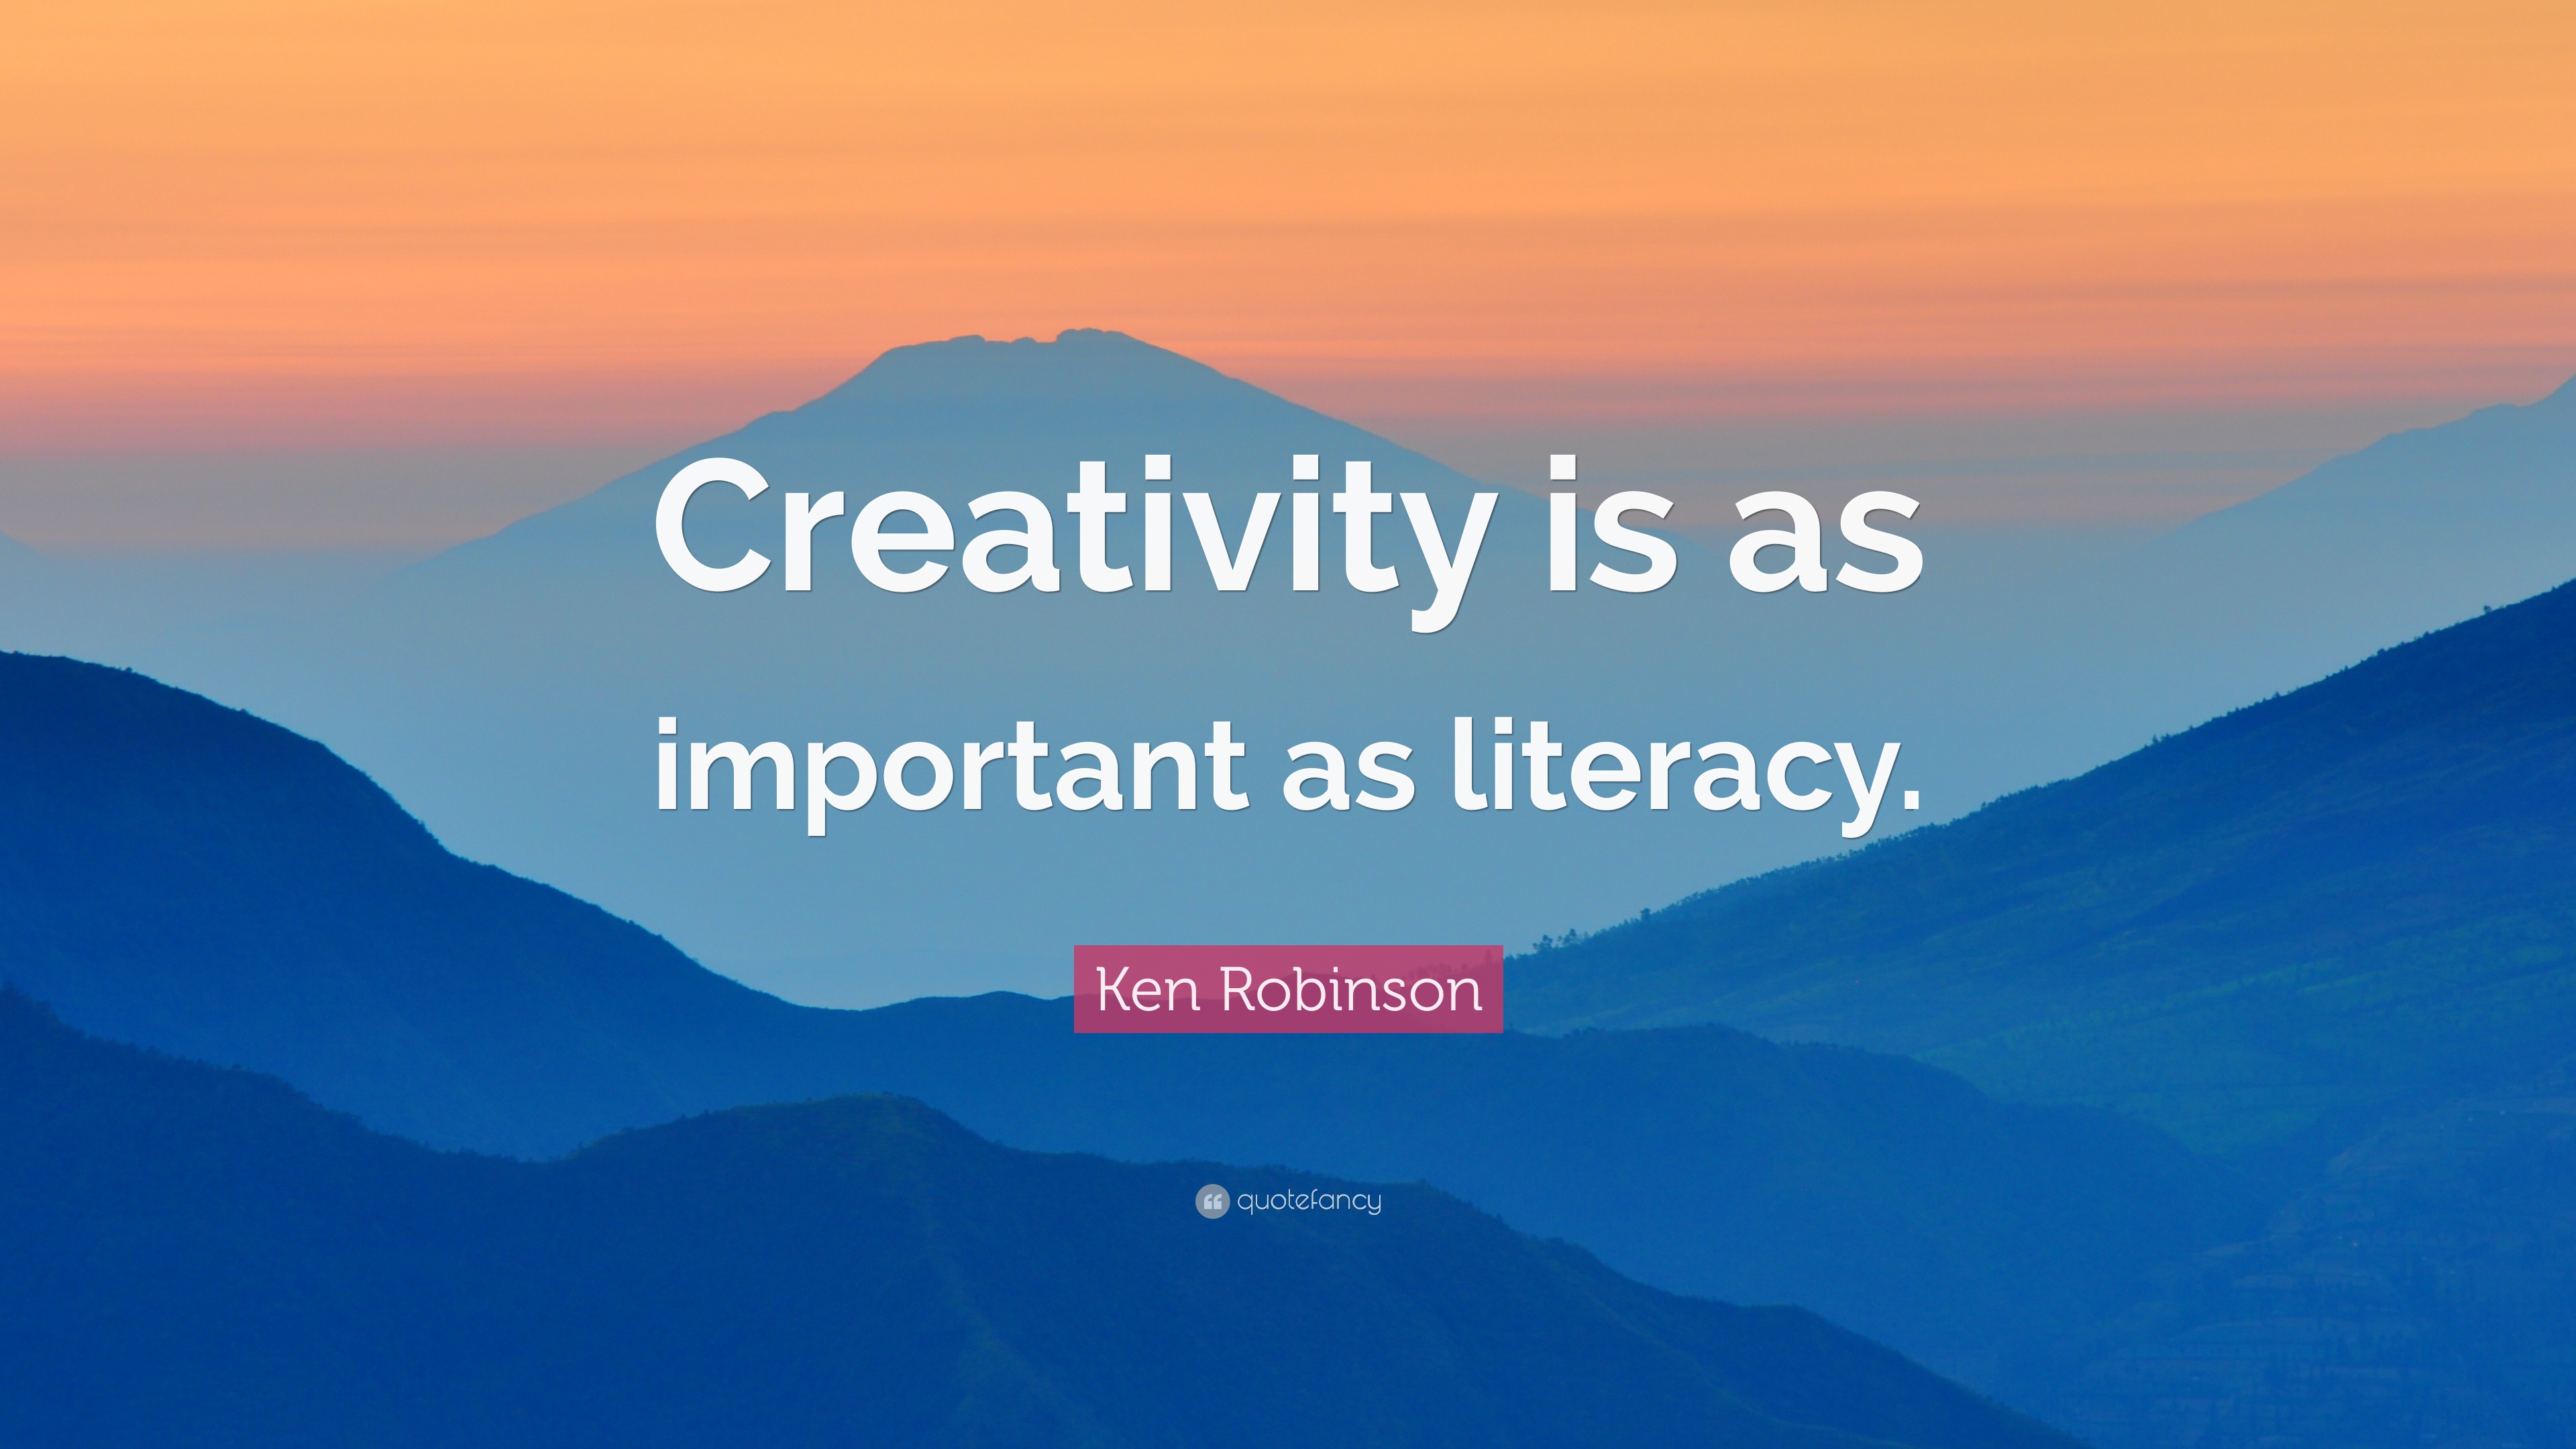 Ken Robinson Quote: “Creativity is as important as literacy